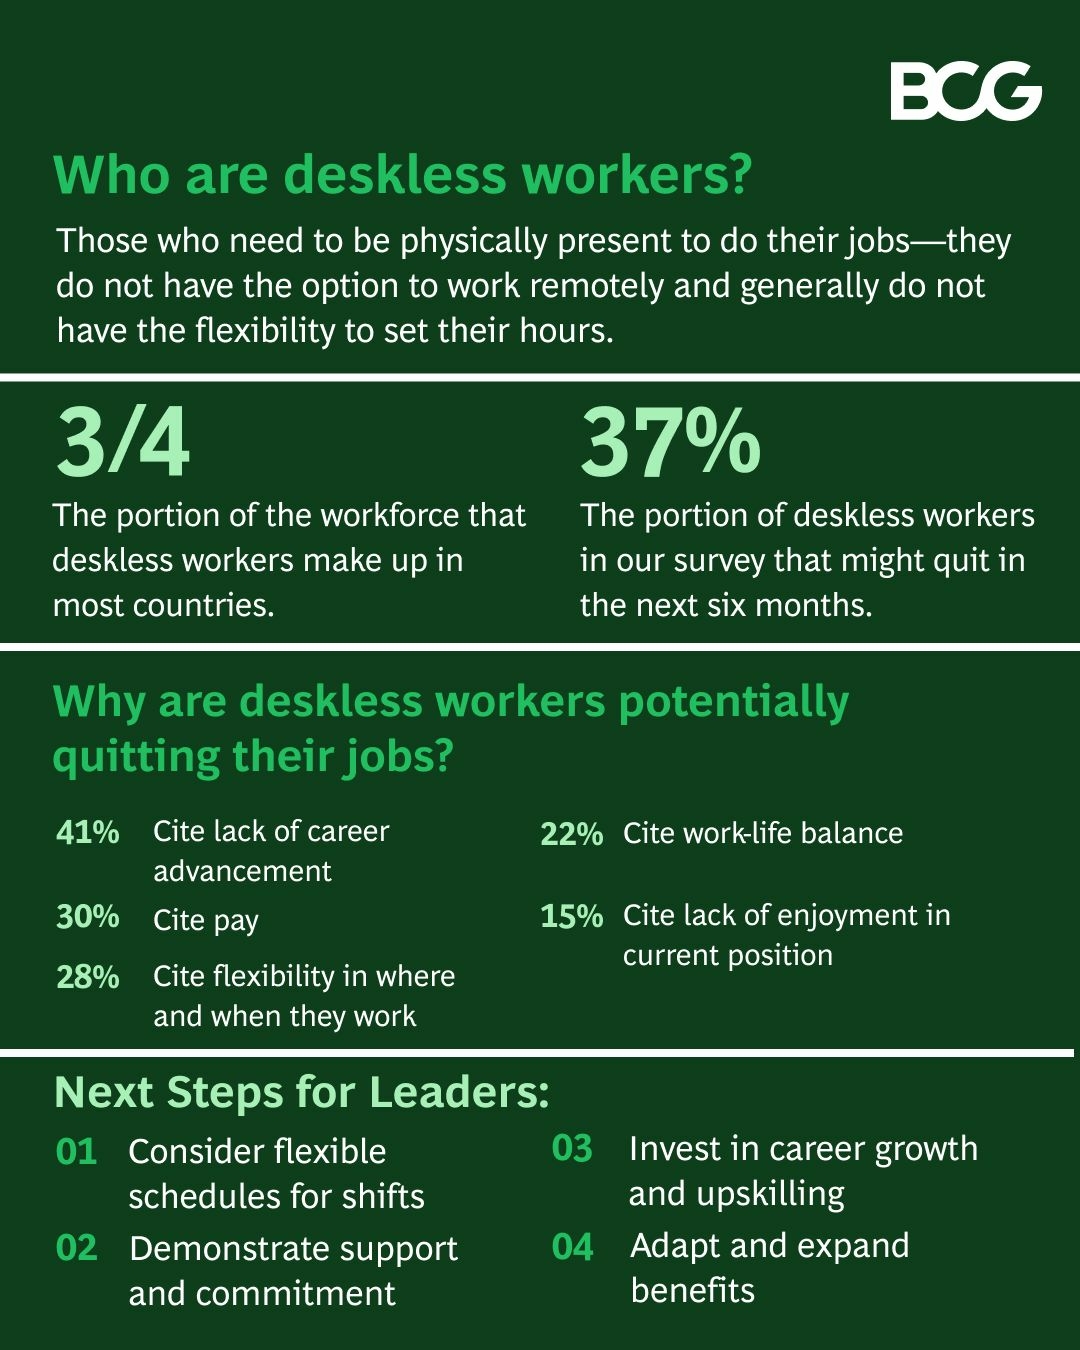 What business executives should know about their deskless workers